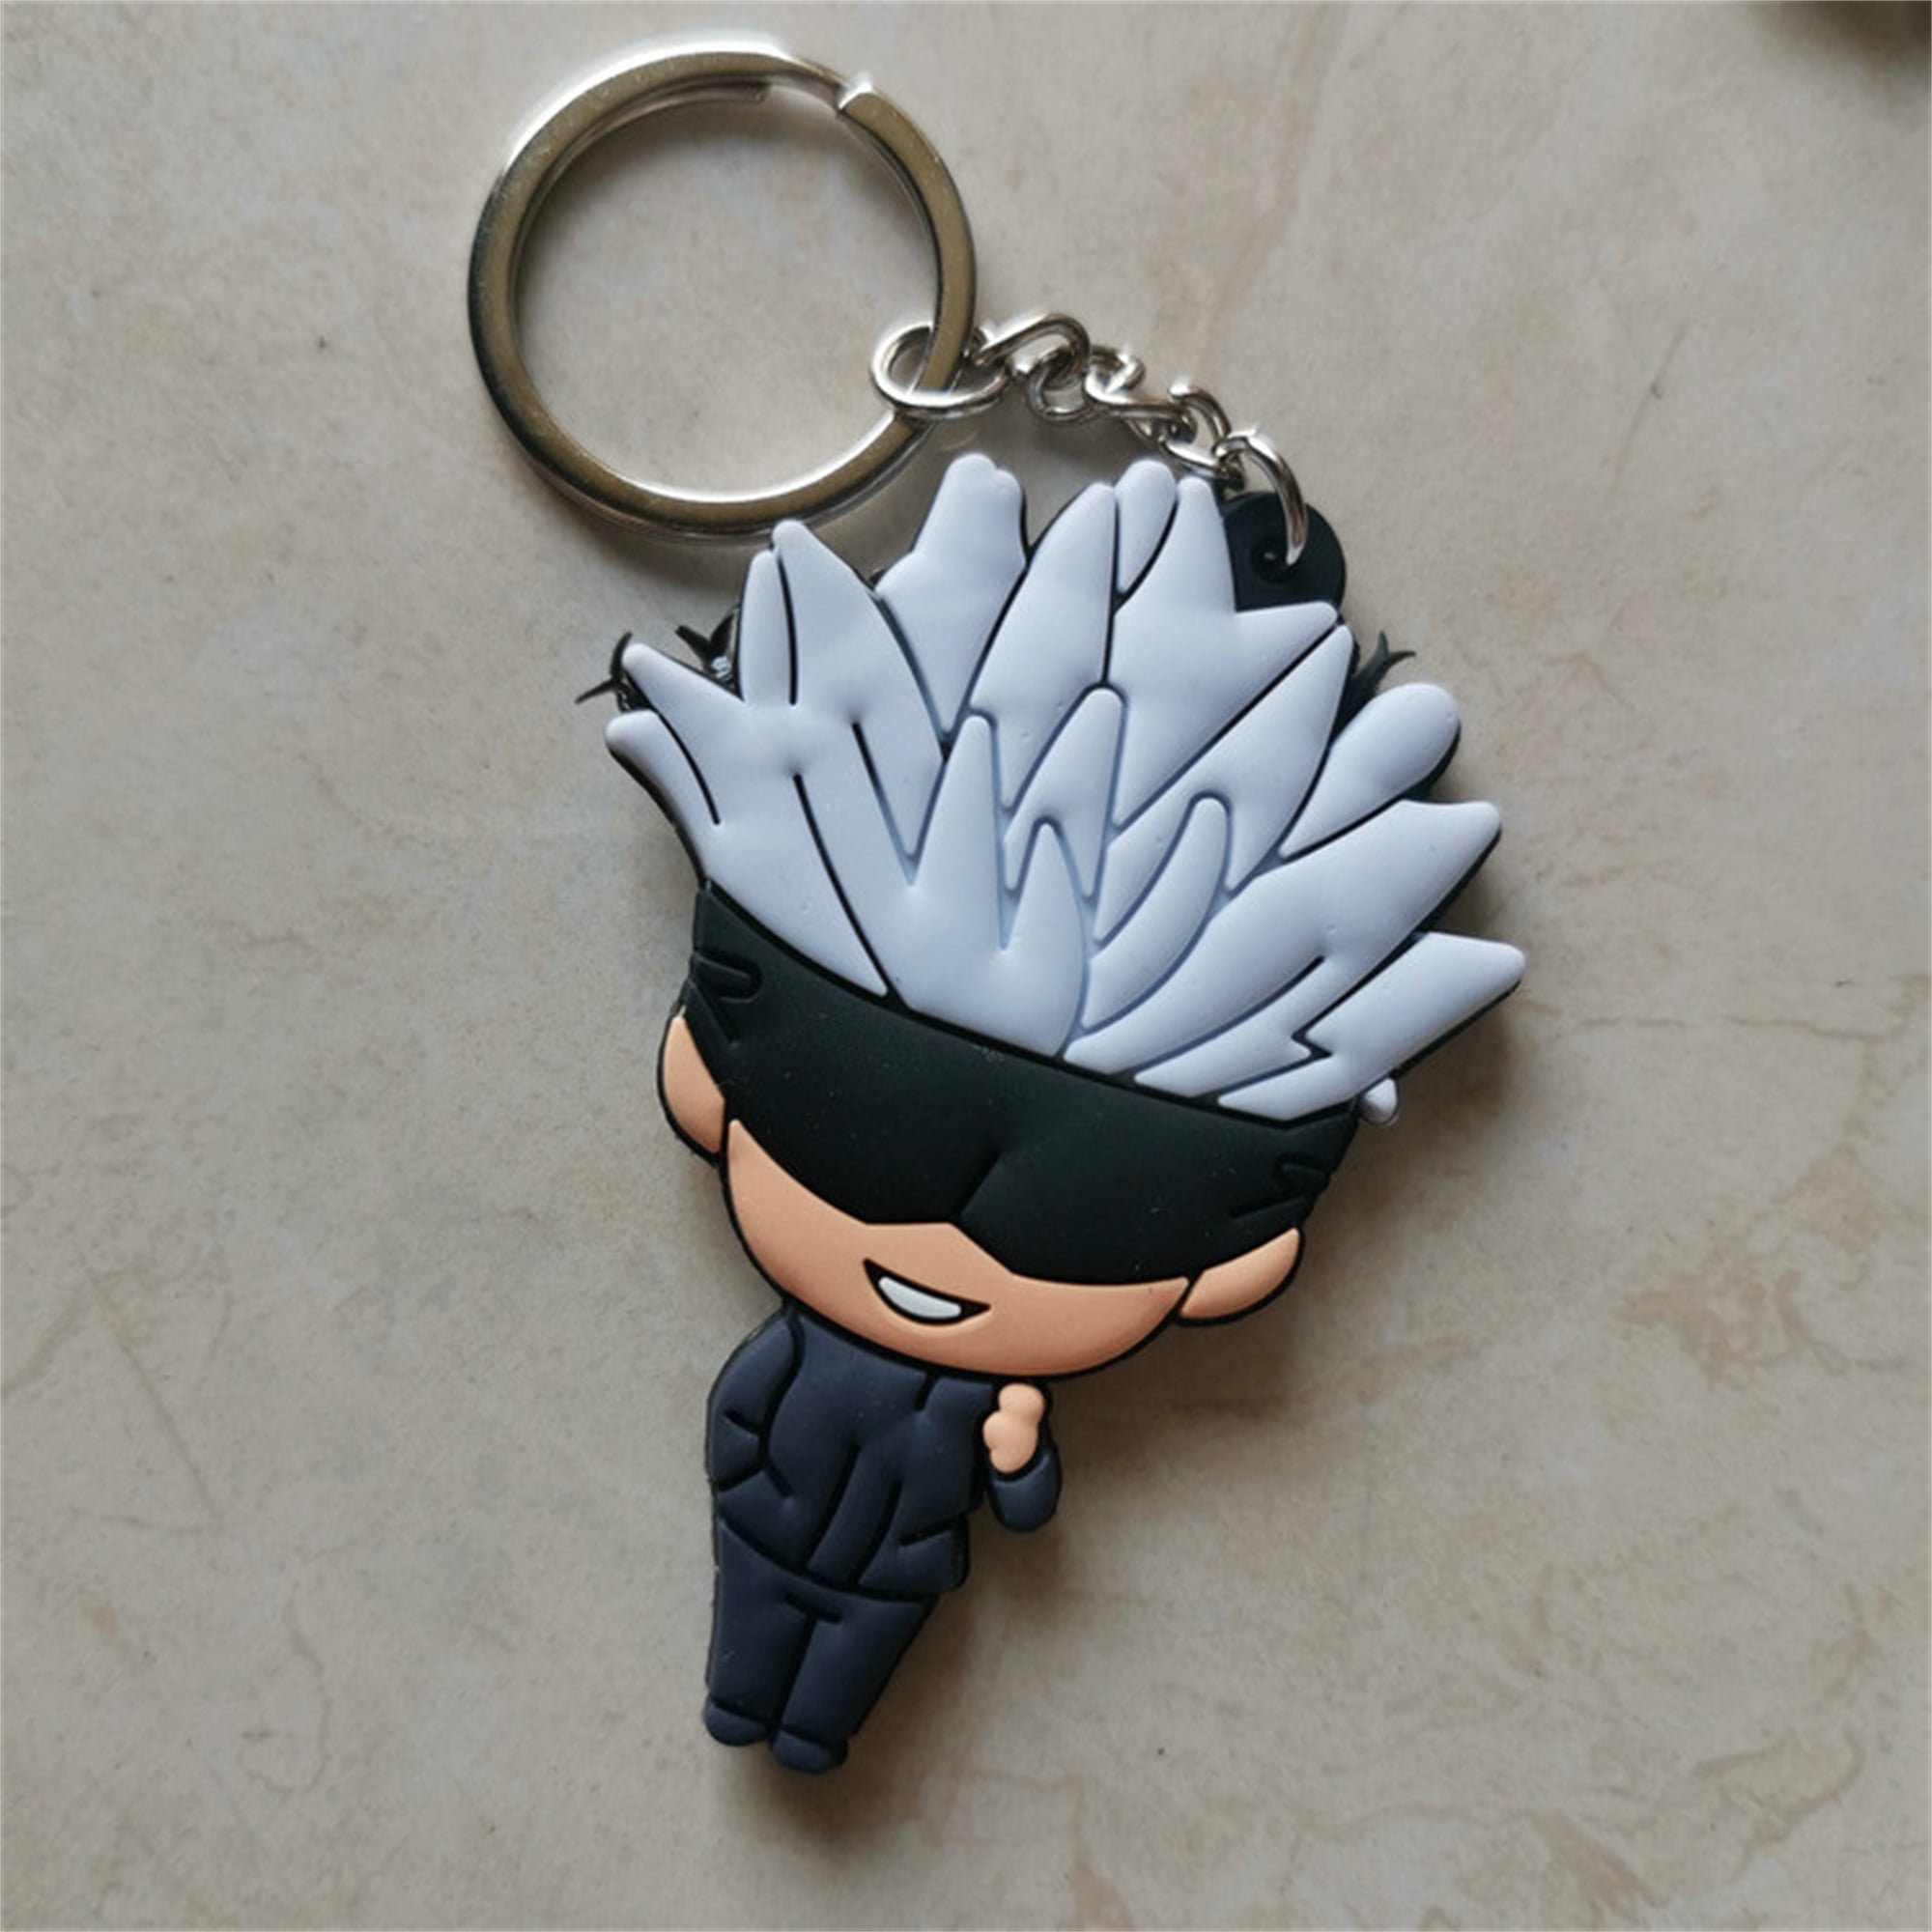 THE THING WITH TWO HEADS KEYCHAIN DOUBLE SIDED ACRYLIC KEYRING 